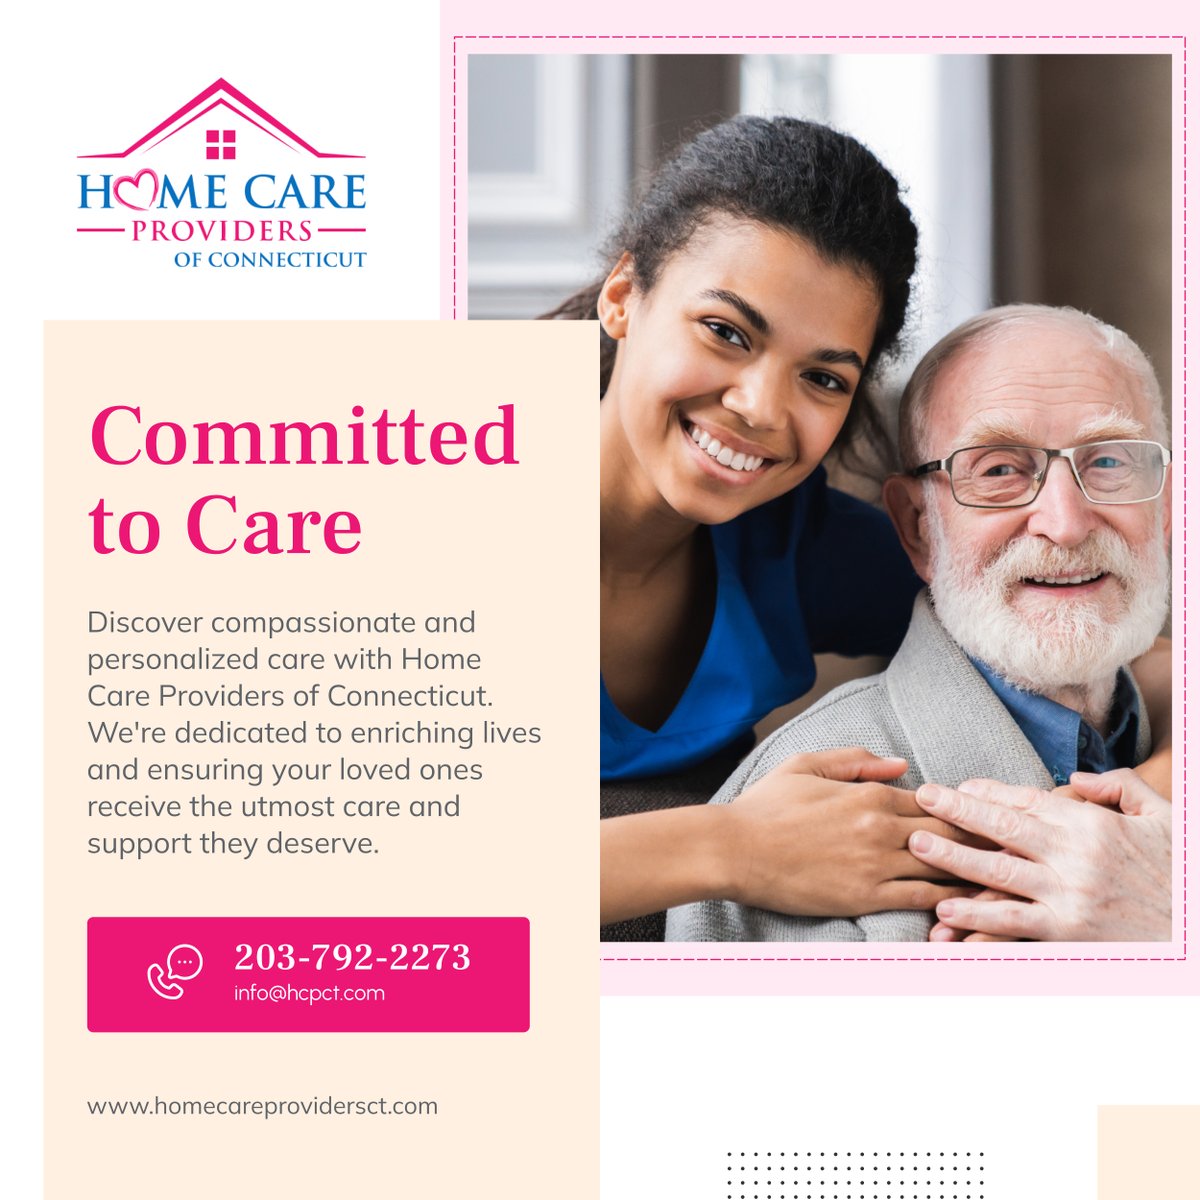 At Home Care Providers of Connecticut, your well-being is our priority. Trust in our compassionate care to support your loved ones with dignity and respect. Connect with us today! 

#BethelCT #HomeCare #CommittedToCare #UtmostCare #CompassionateCare